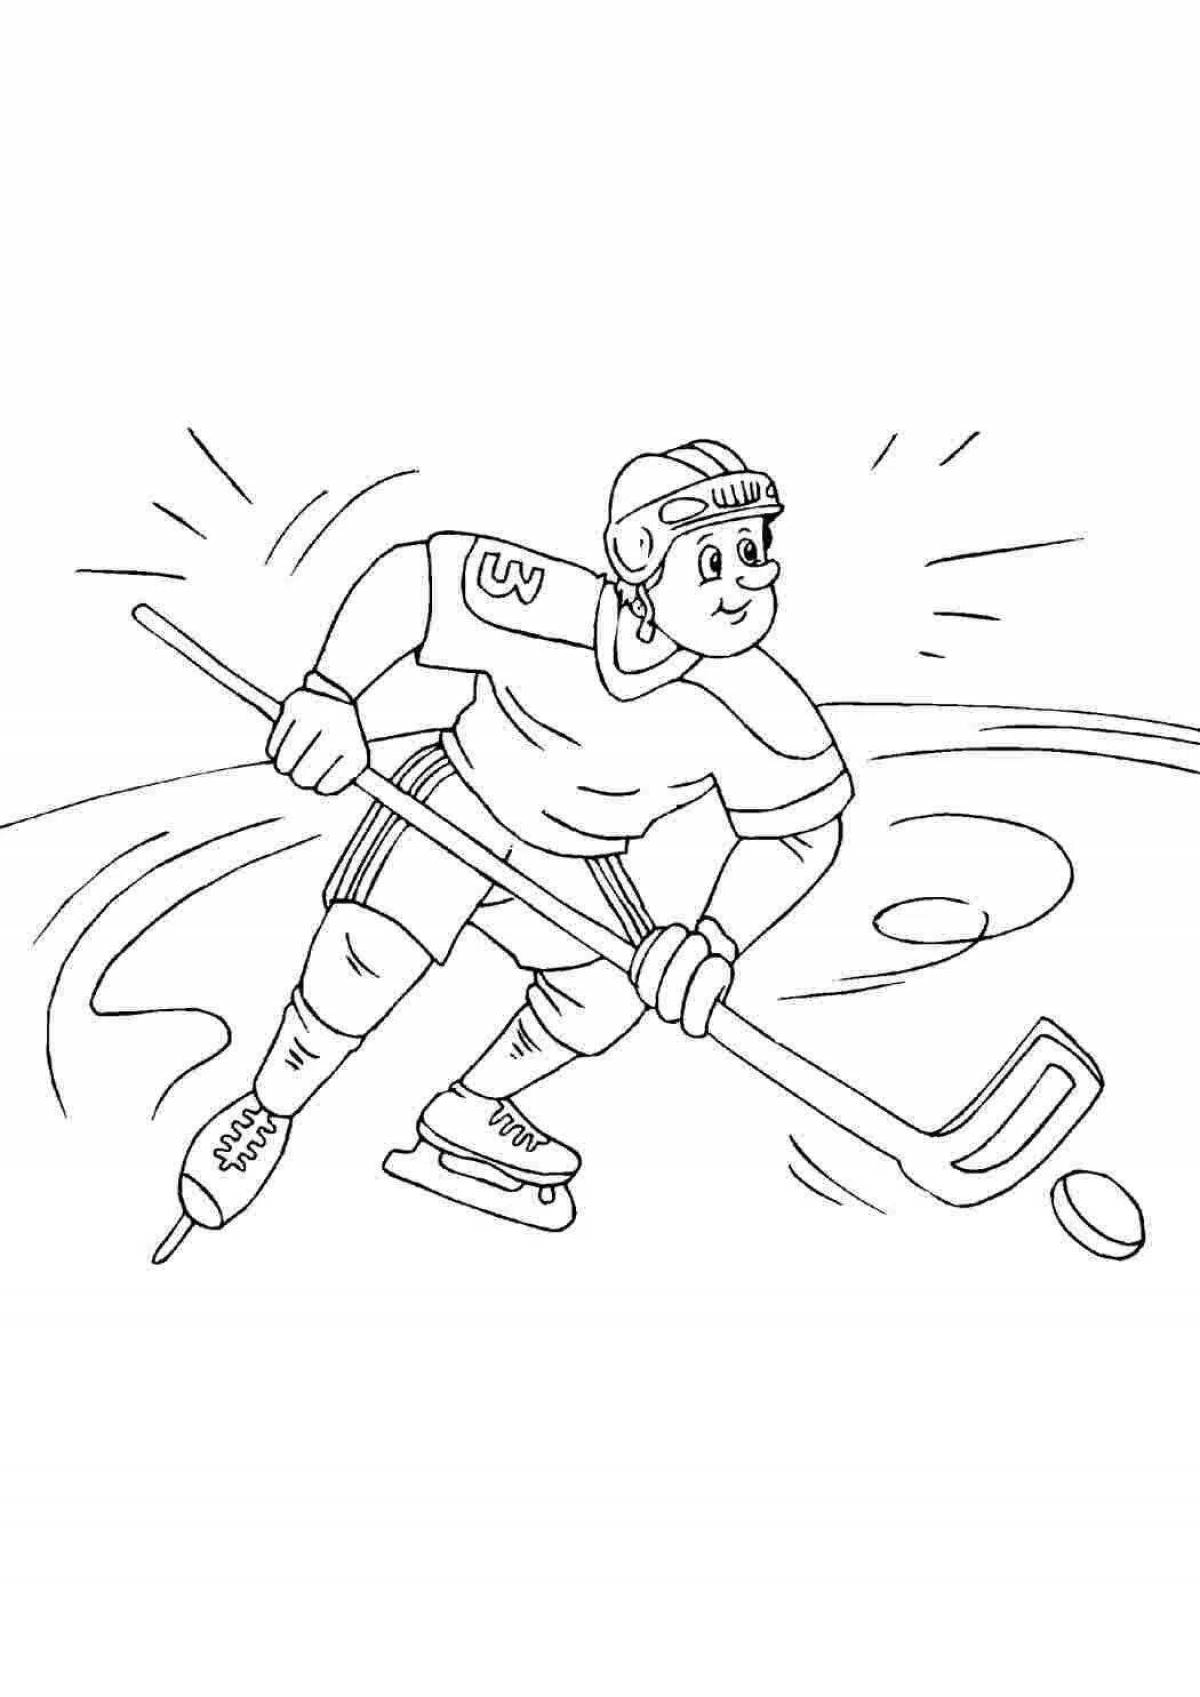 Animated winter sports coloring page for 6-7 year olds